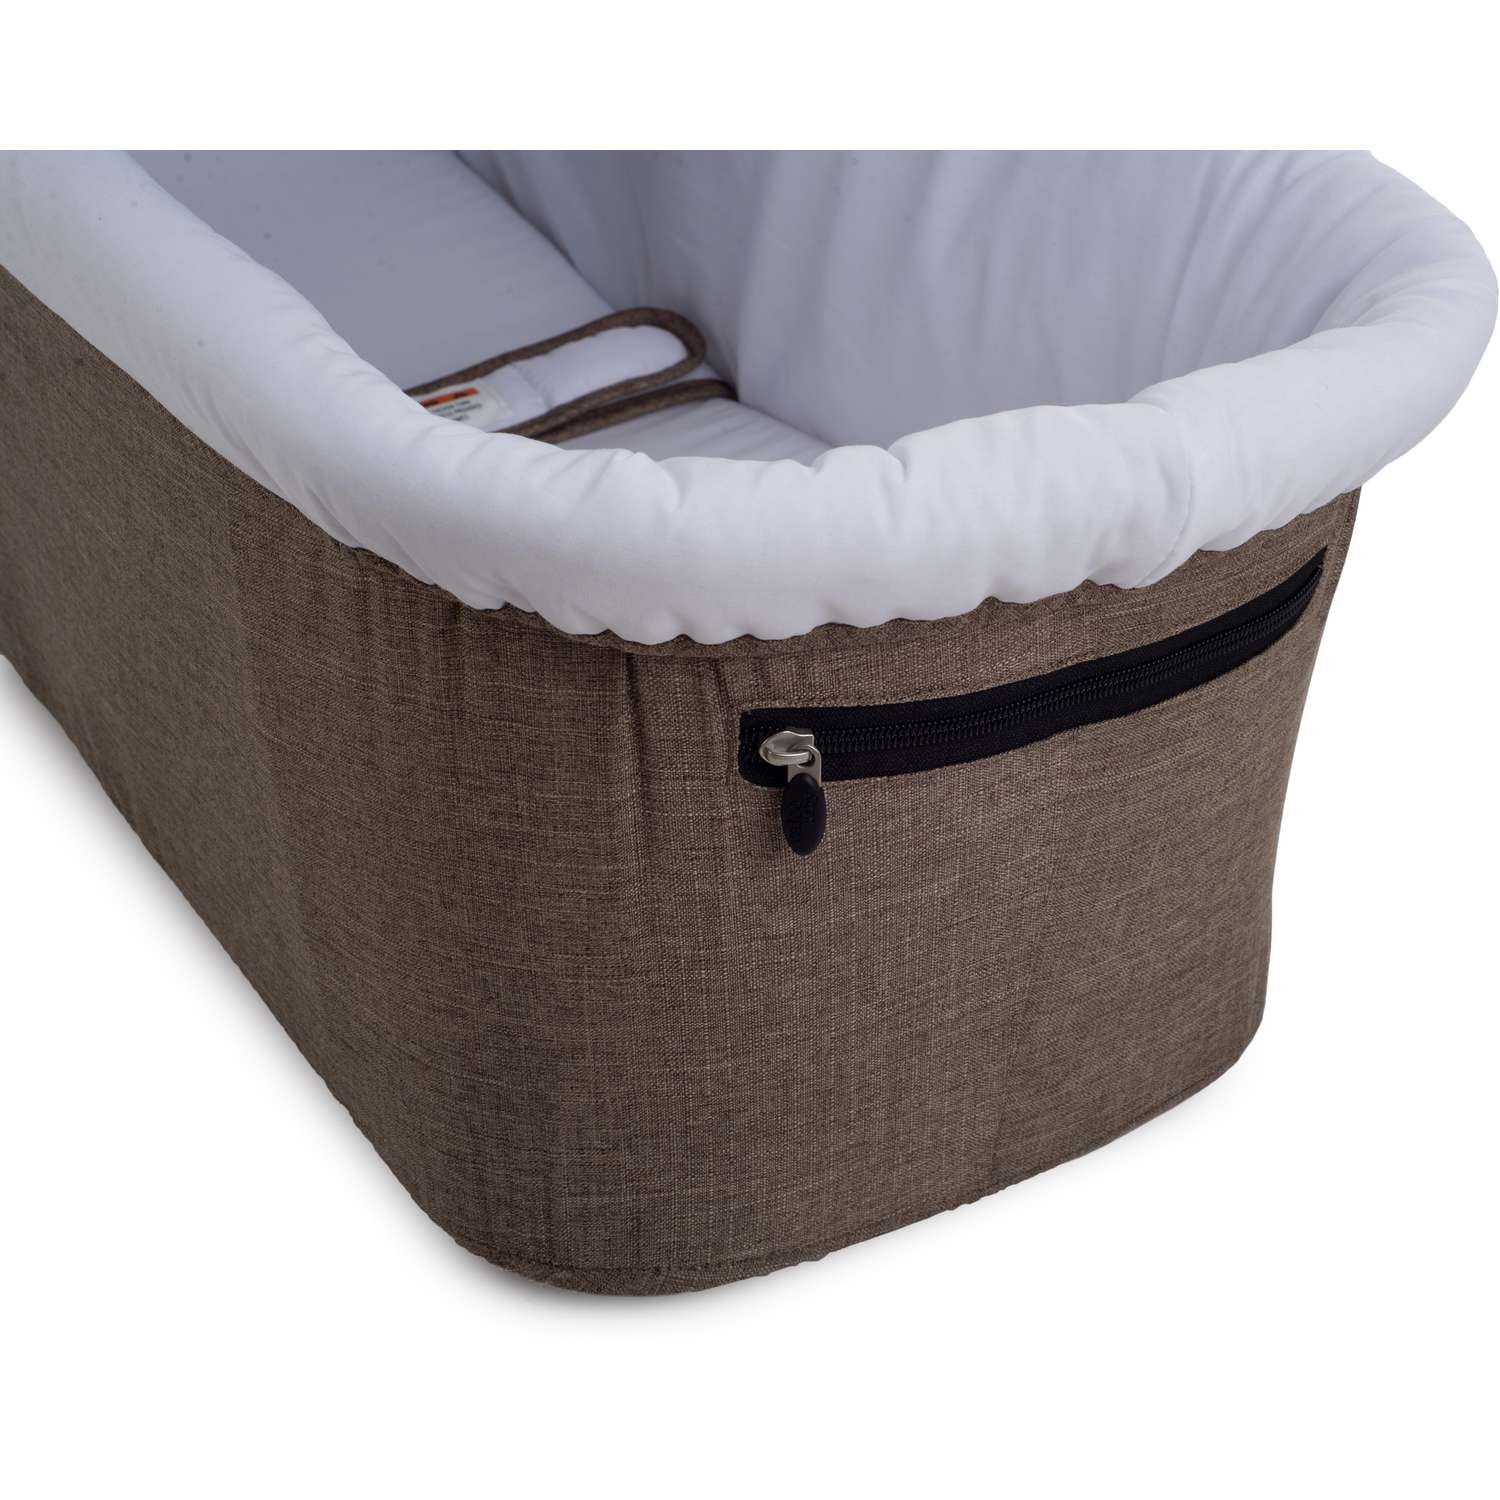 Люлька External Bassinet Valco Baby Snap Trend Snap 4 Trend Snap 4 Ultra Trend / Cappuccino 0070 - фото 7